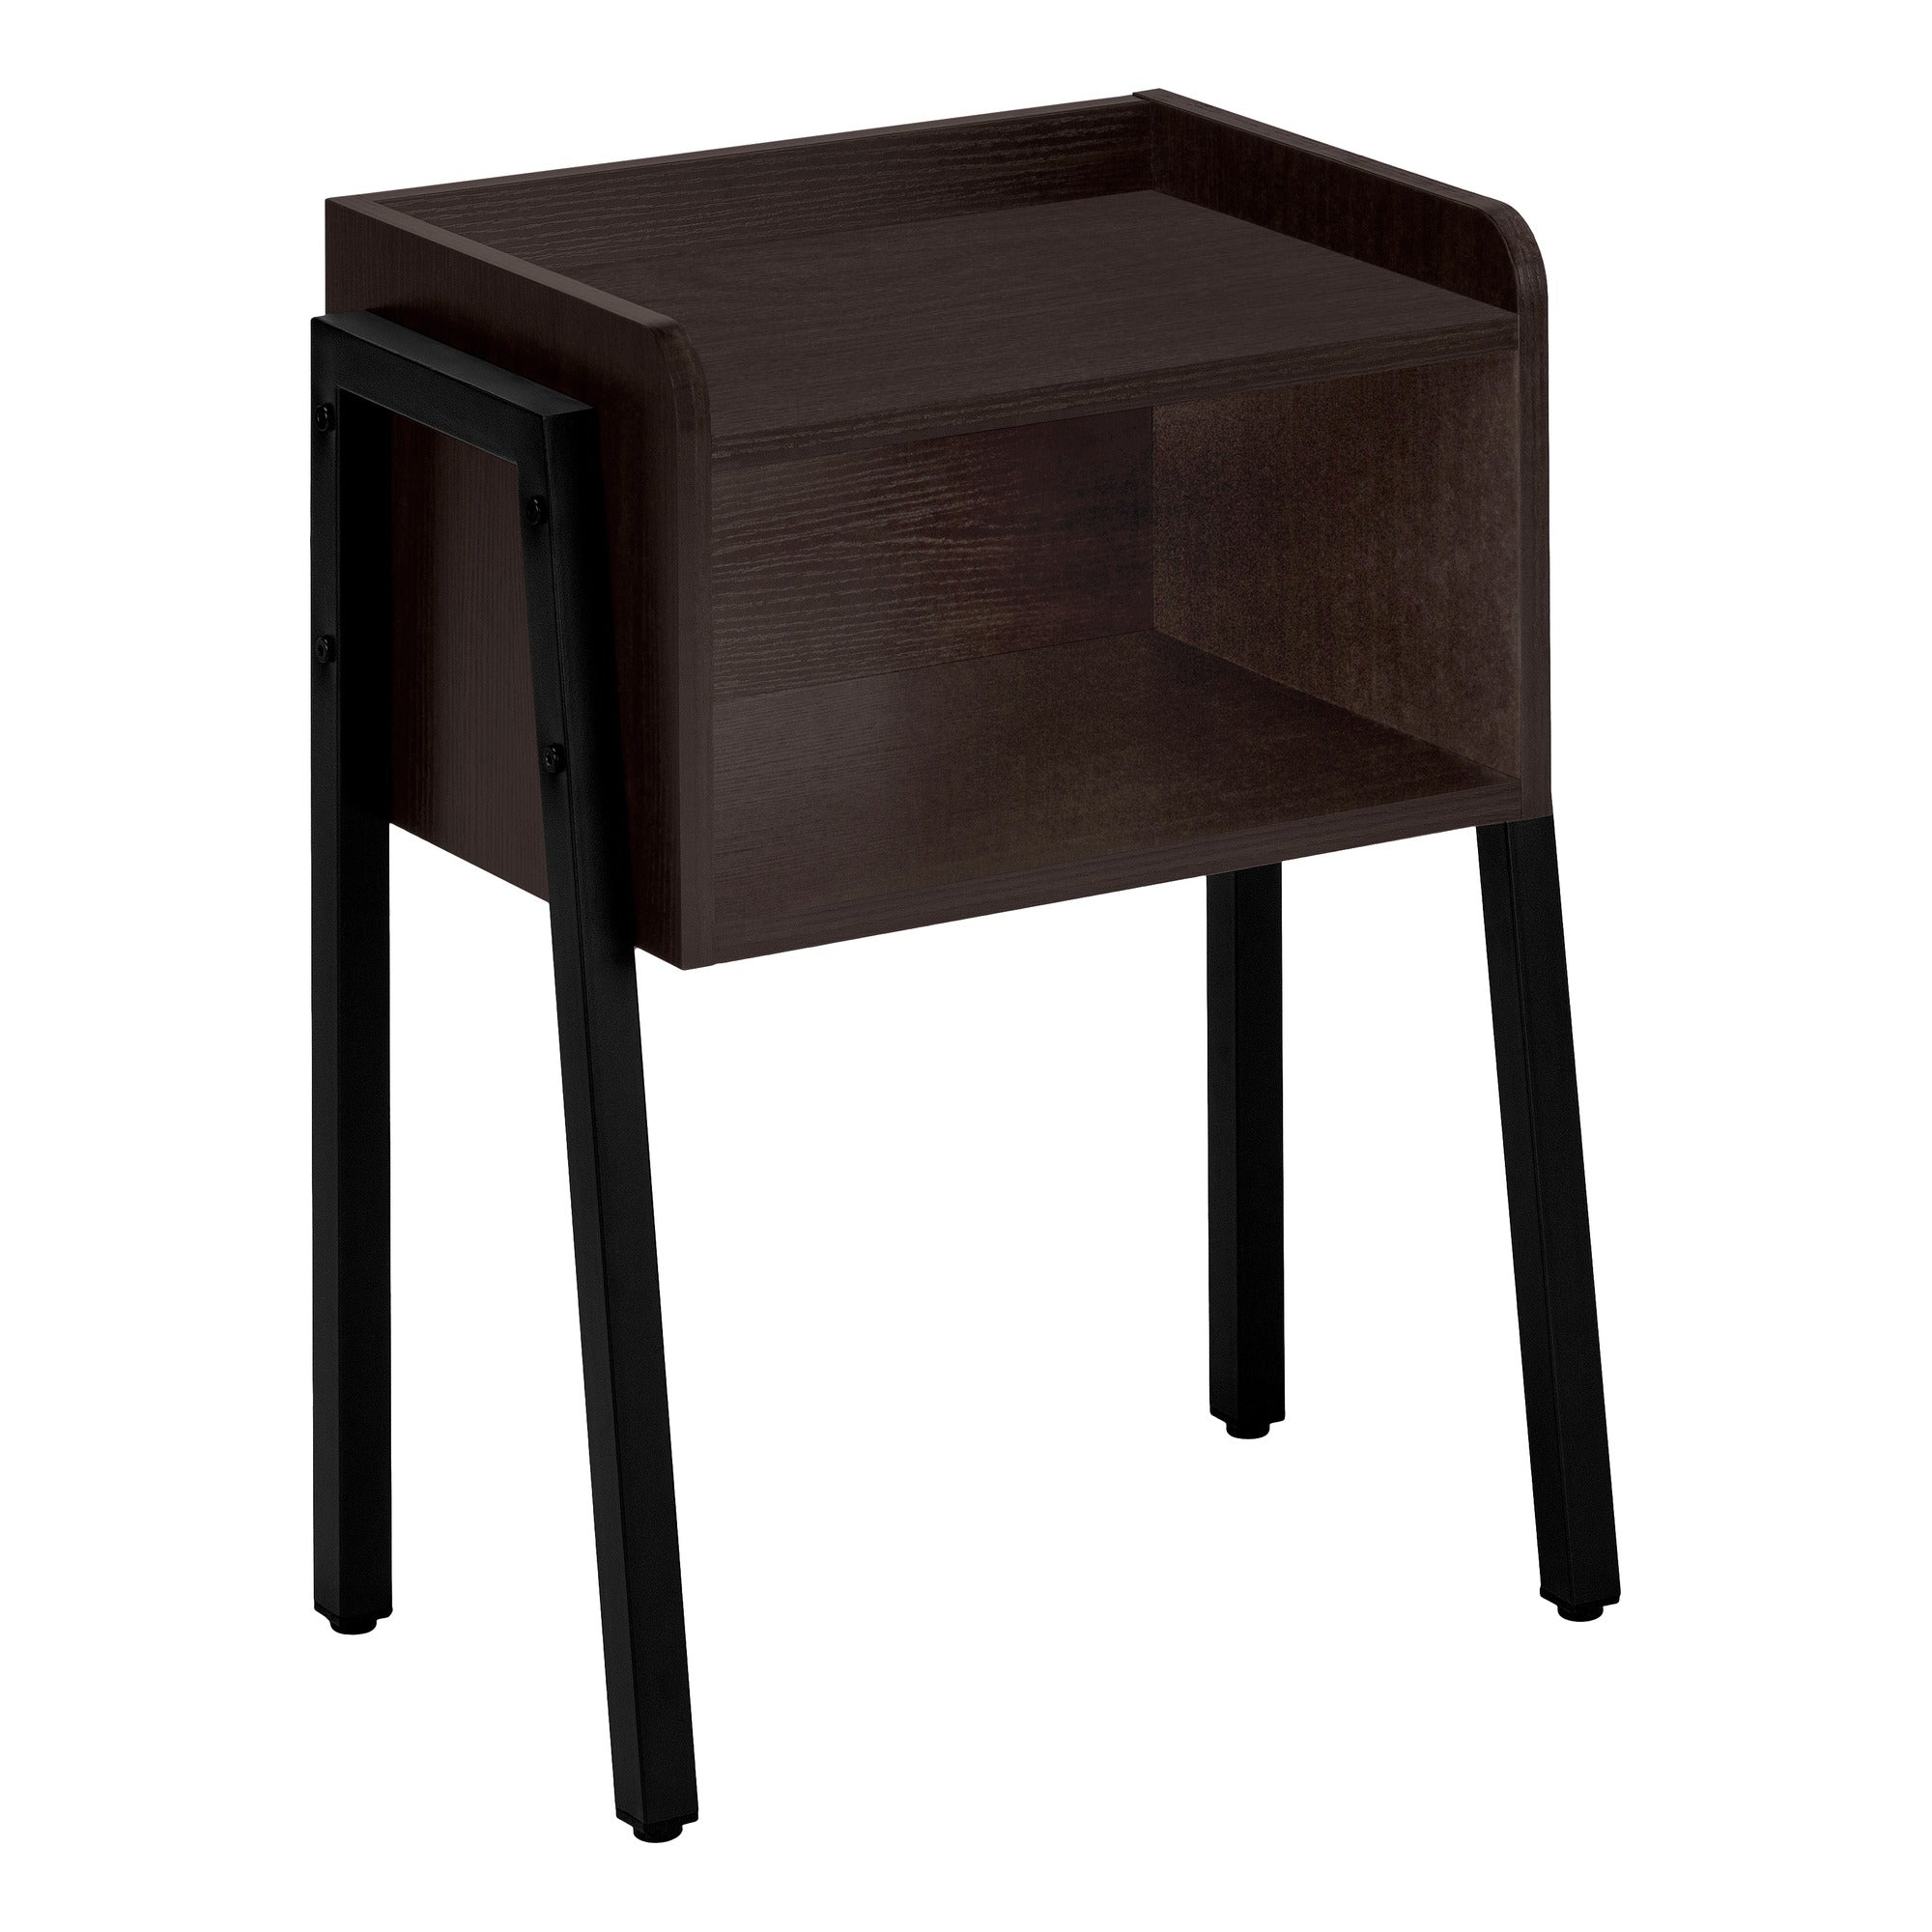 ACCENT TABLE - 23"H / BROWN RECLAIMED-LOOK / BLACK METAL